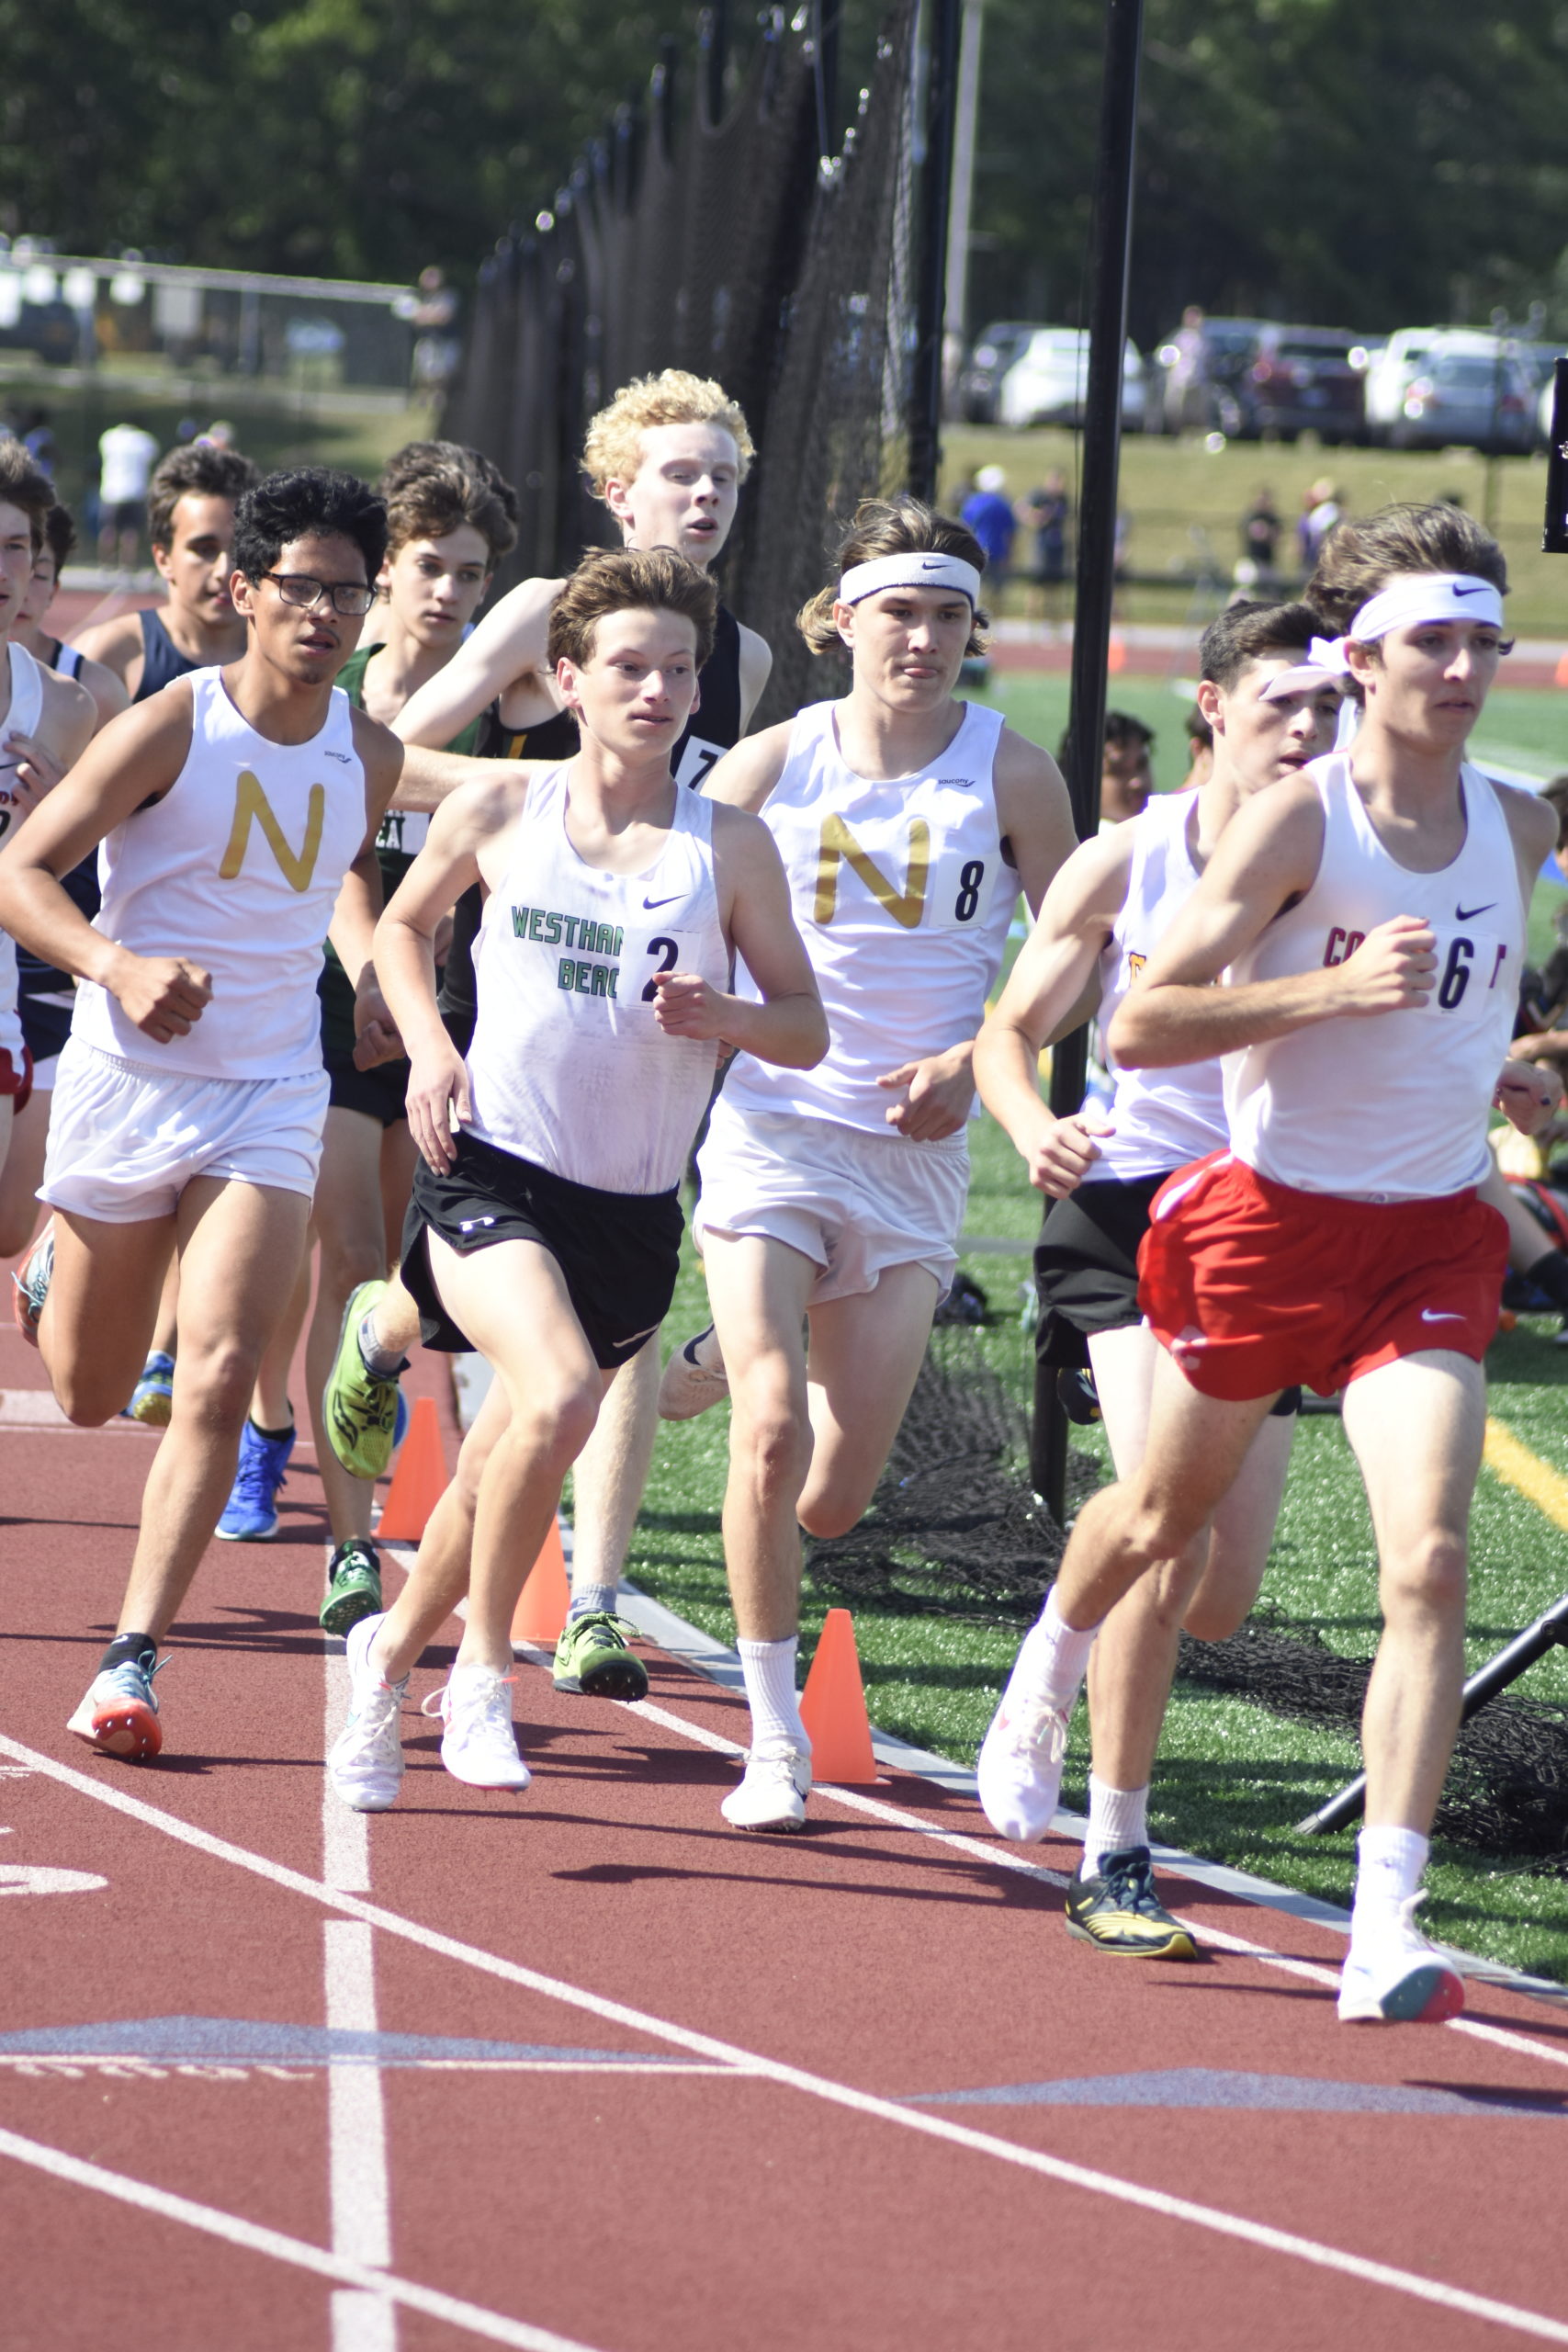 Westhampton Beach sophomore Maximus Haynia at the start of the 3,200-meter race, which he won.